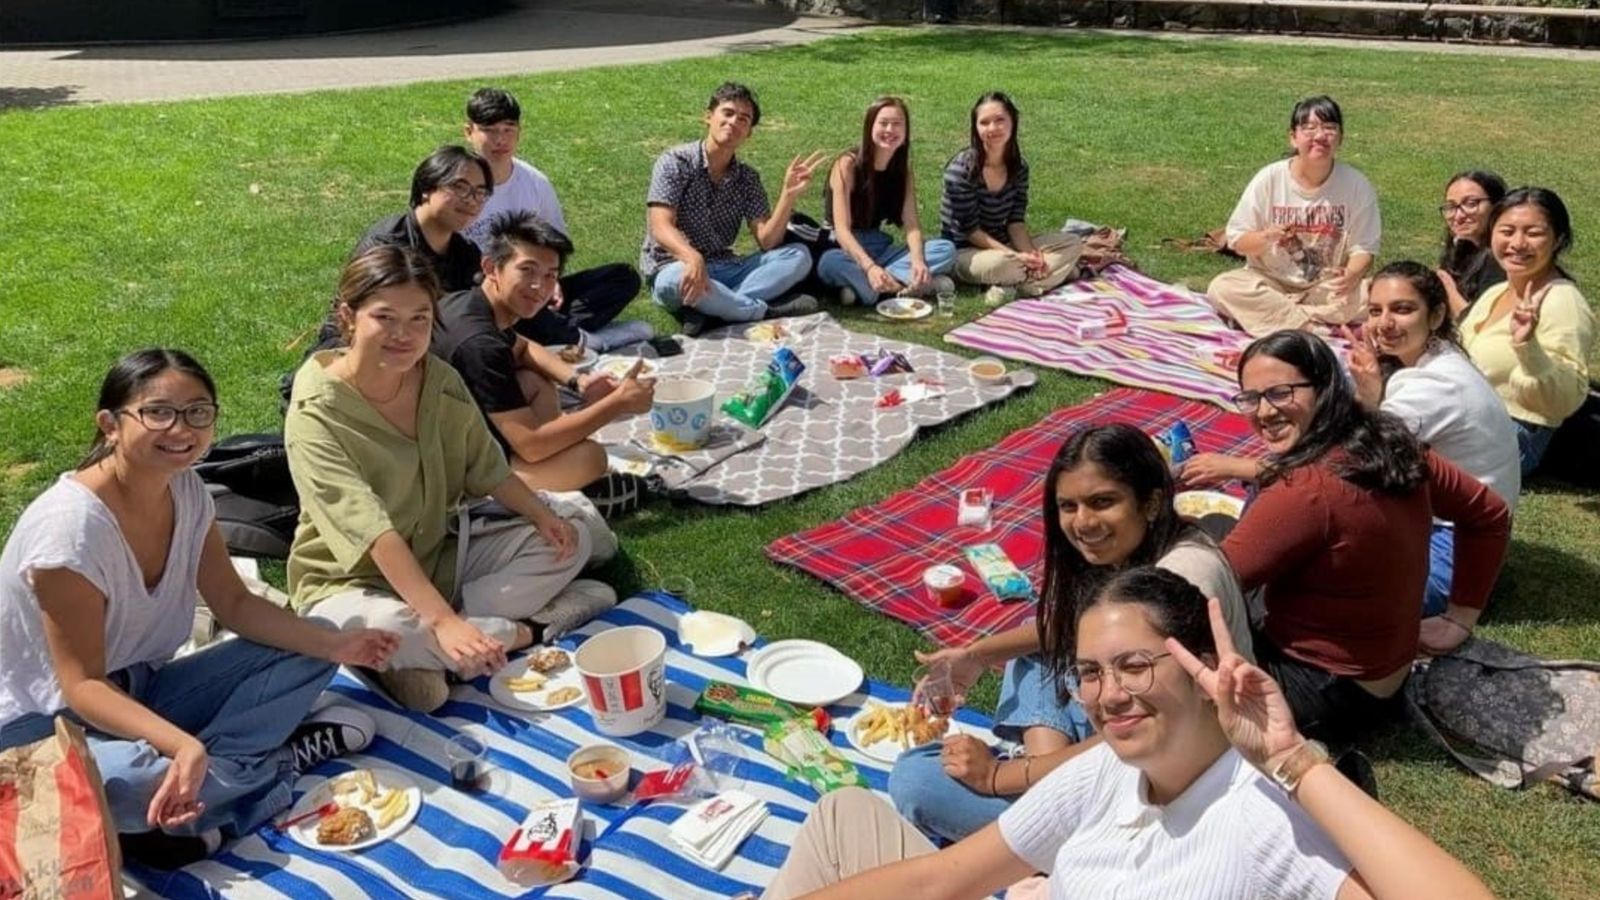 Asian Law Students Association members sitting together during a picnic.